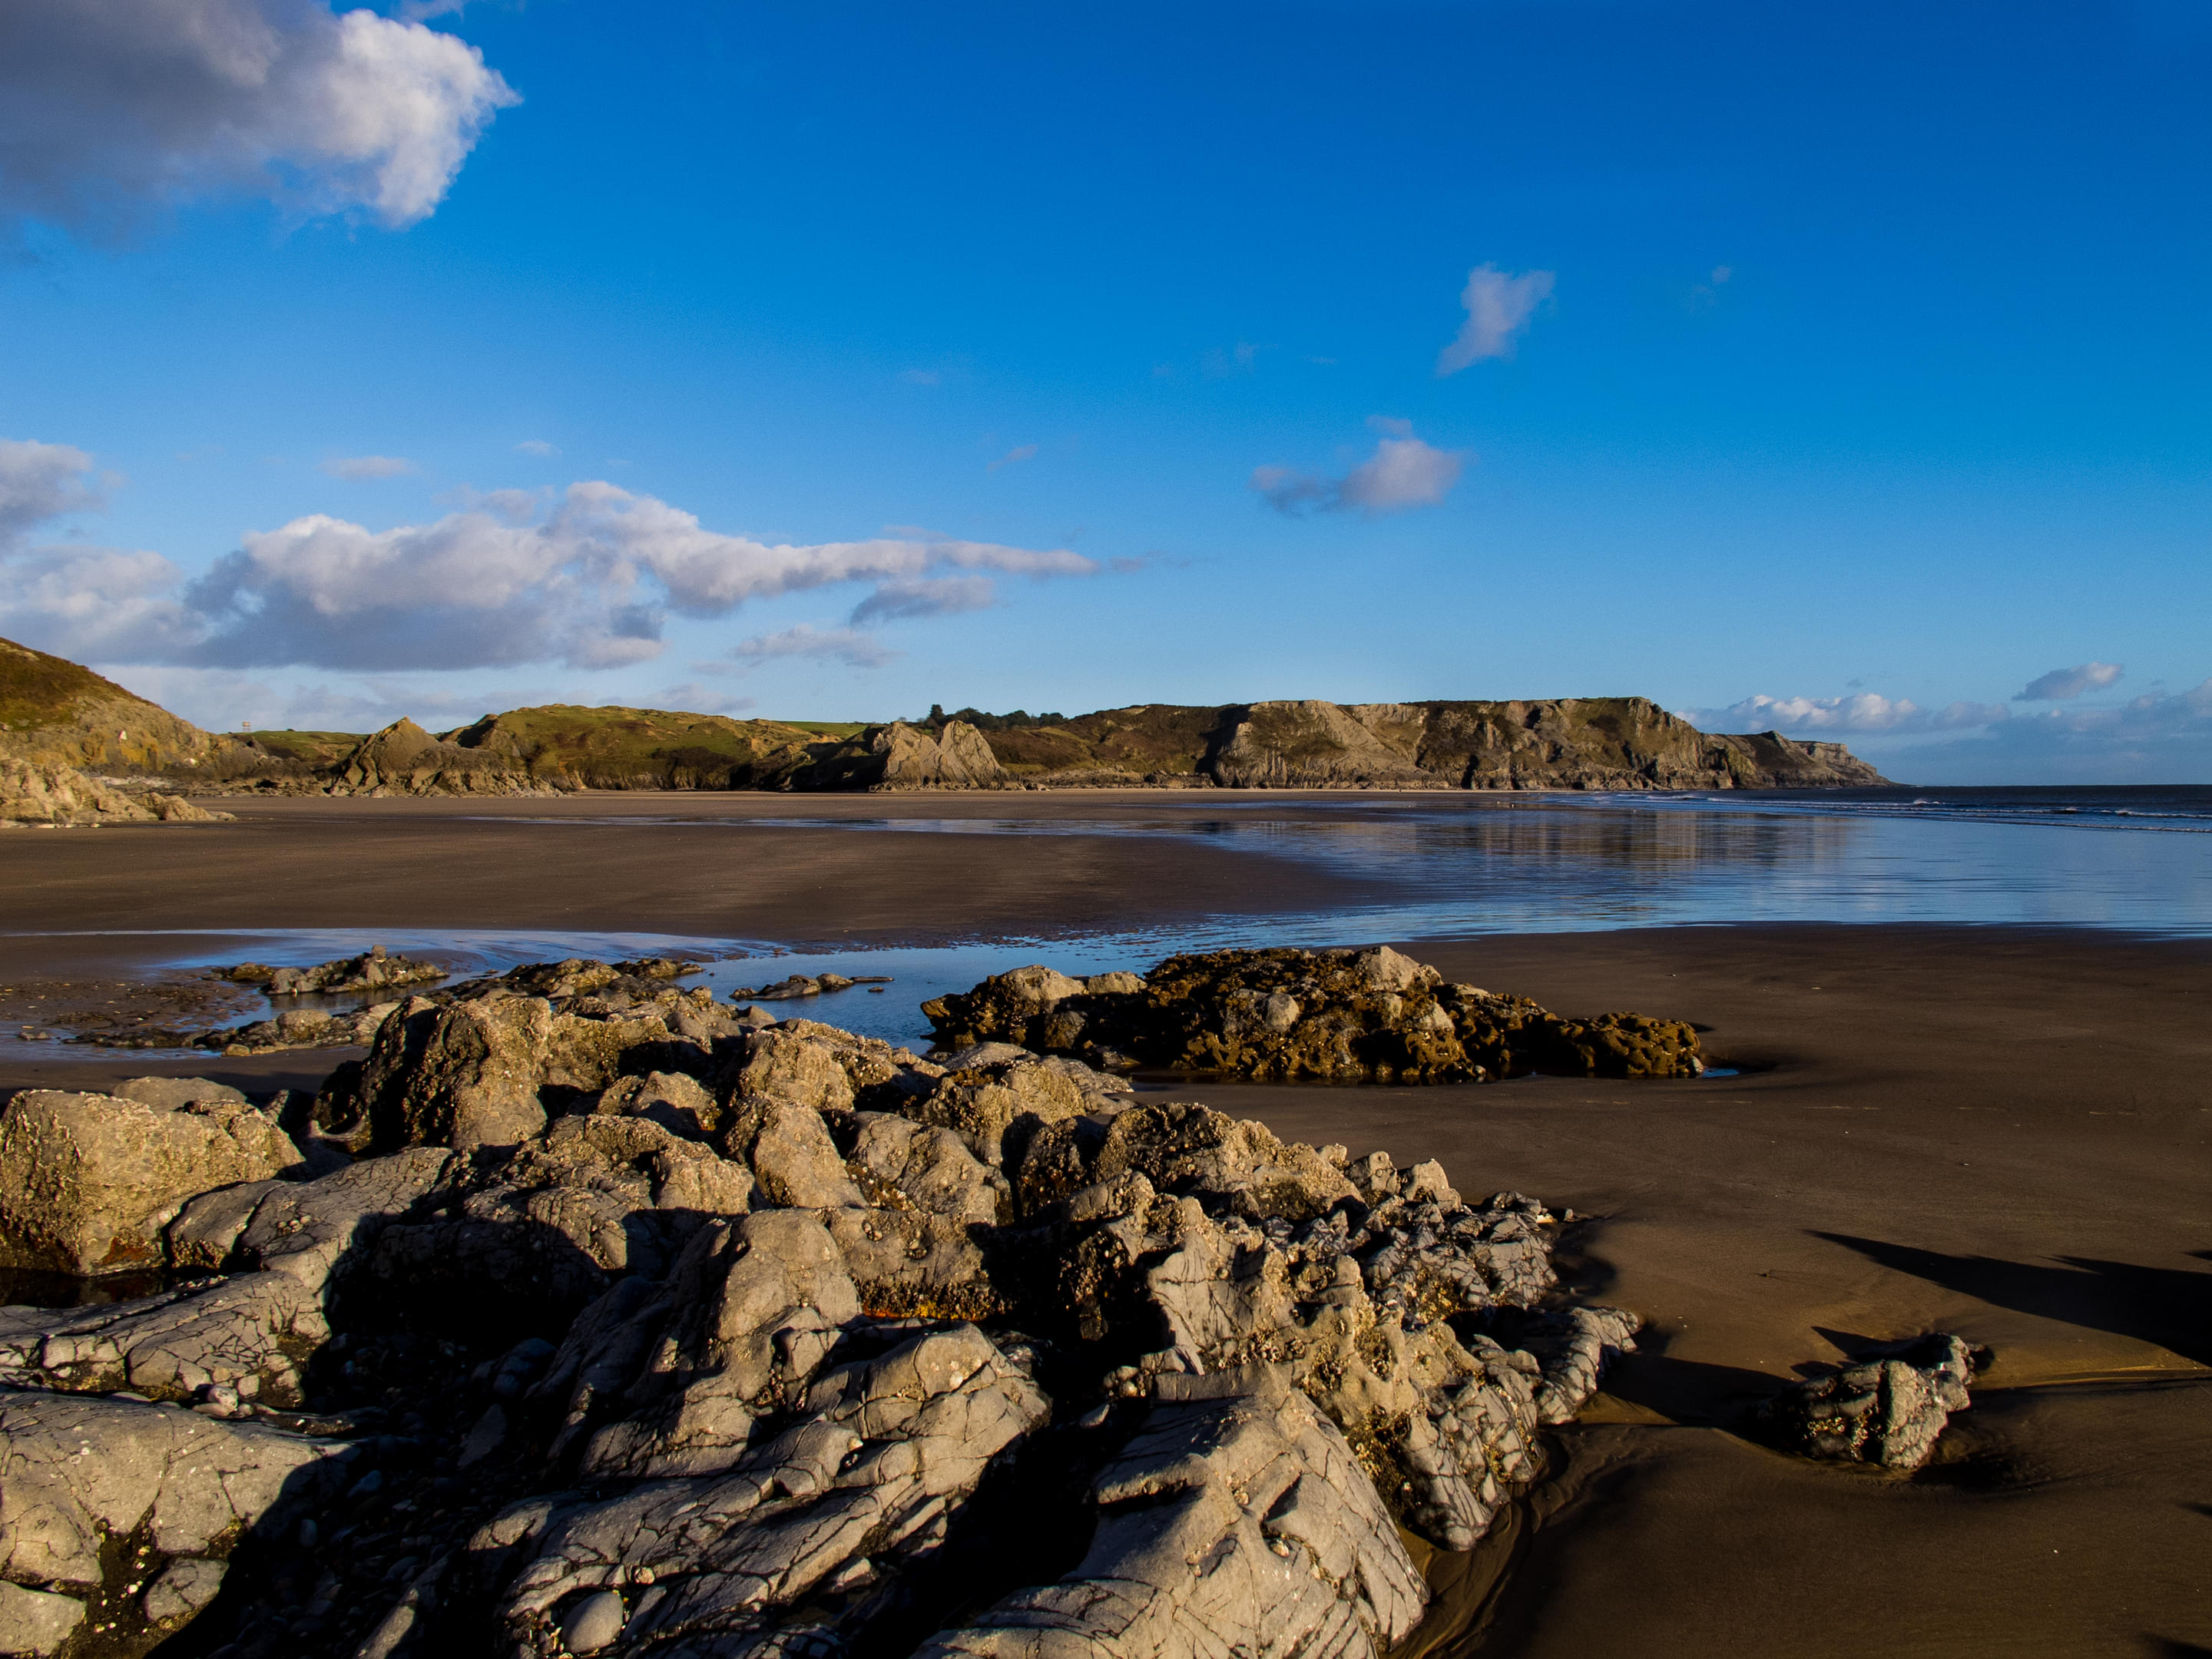 Gower Peninsula Overview